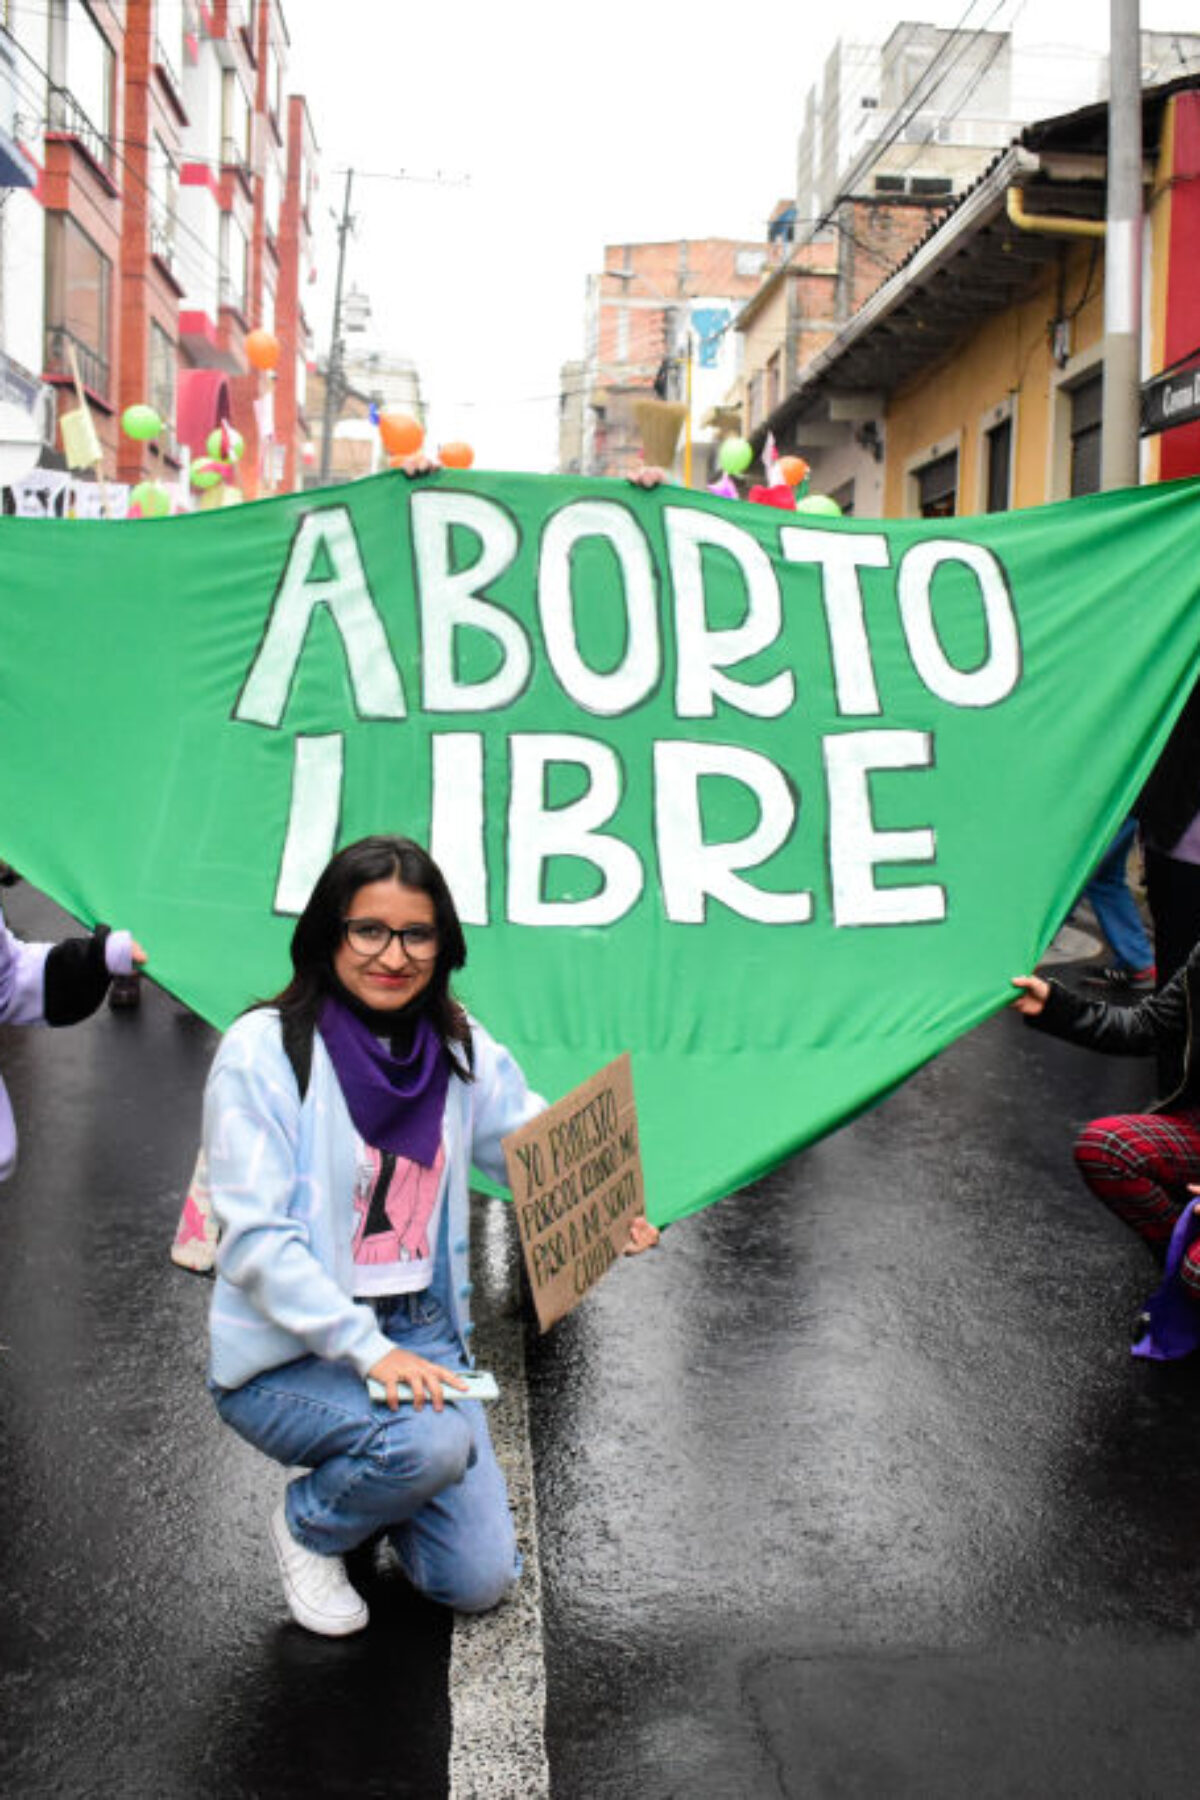 Women celebrate the decriminalization of abortions in Colombia as women participate in the International Womens day demonstrations in Pasto - Narino, Colombia on March 8, 2022. (Photo by: Elizabeth Palchucan/Long Visual Press/Universal Images Group via Getty Images)